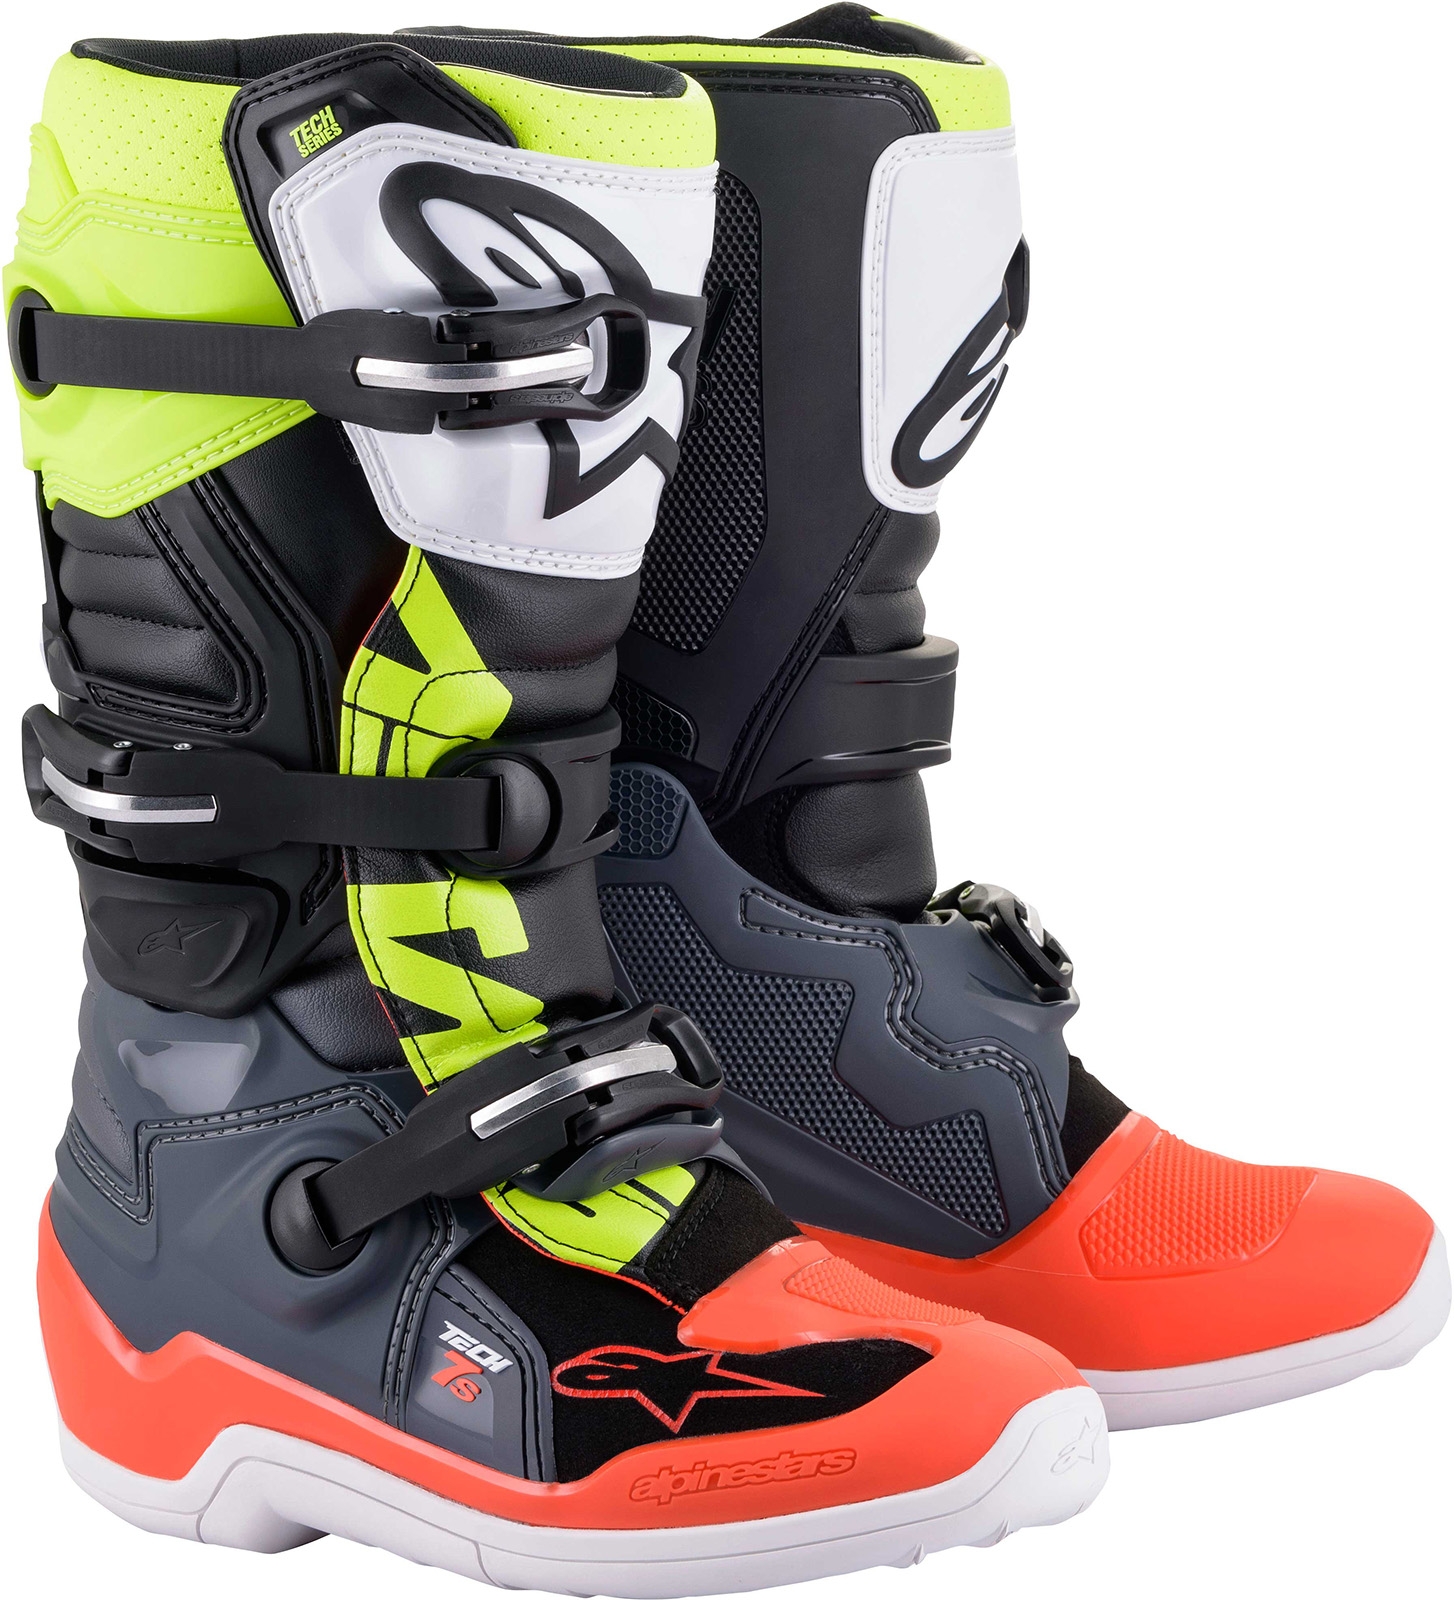 New 2019 Youth Kids Alpinestars Tech 7S Motocross Boots WHITE/RED/GREY 